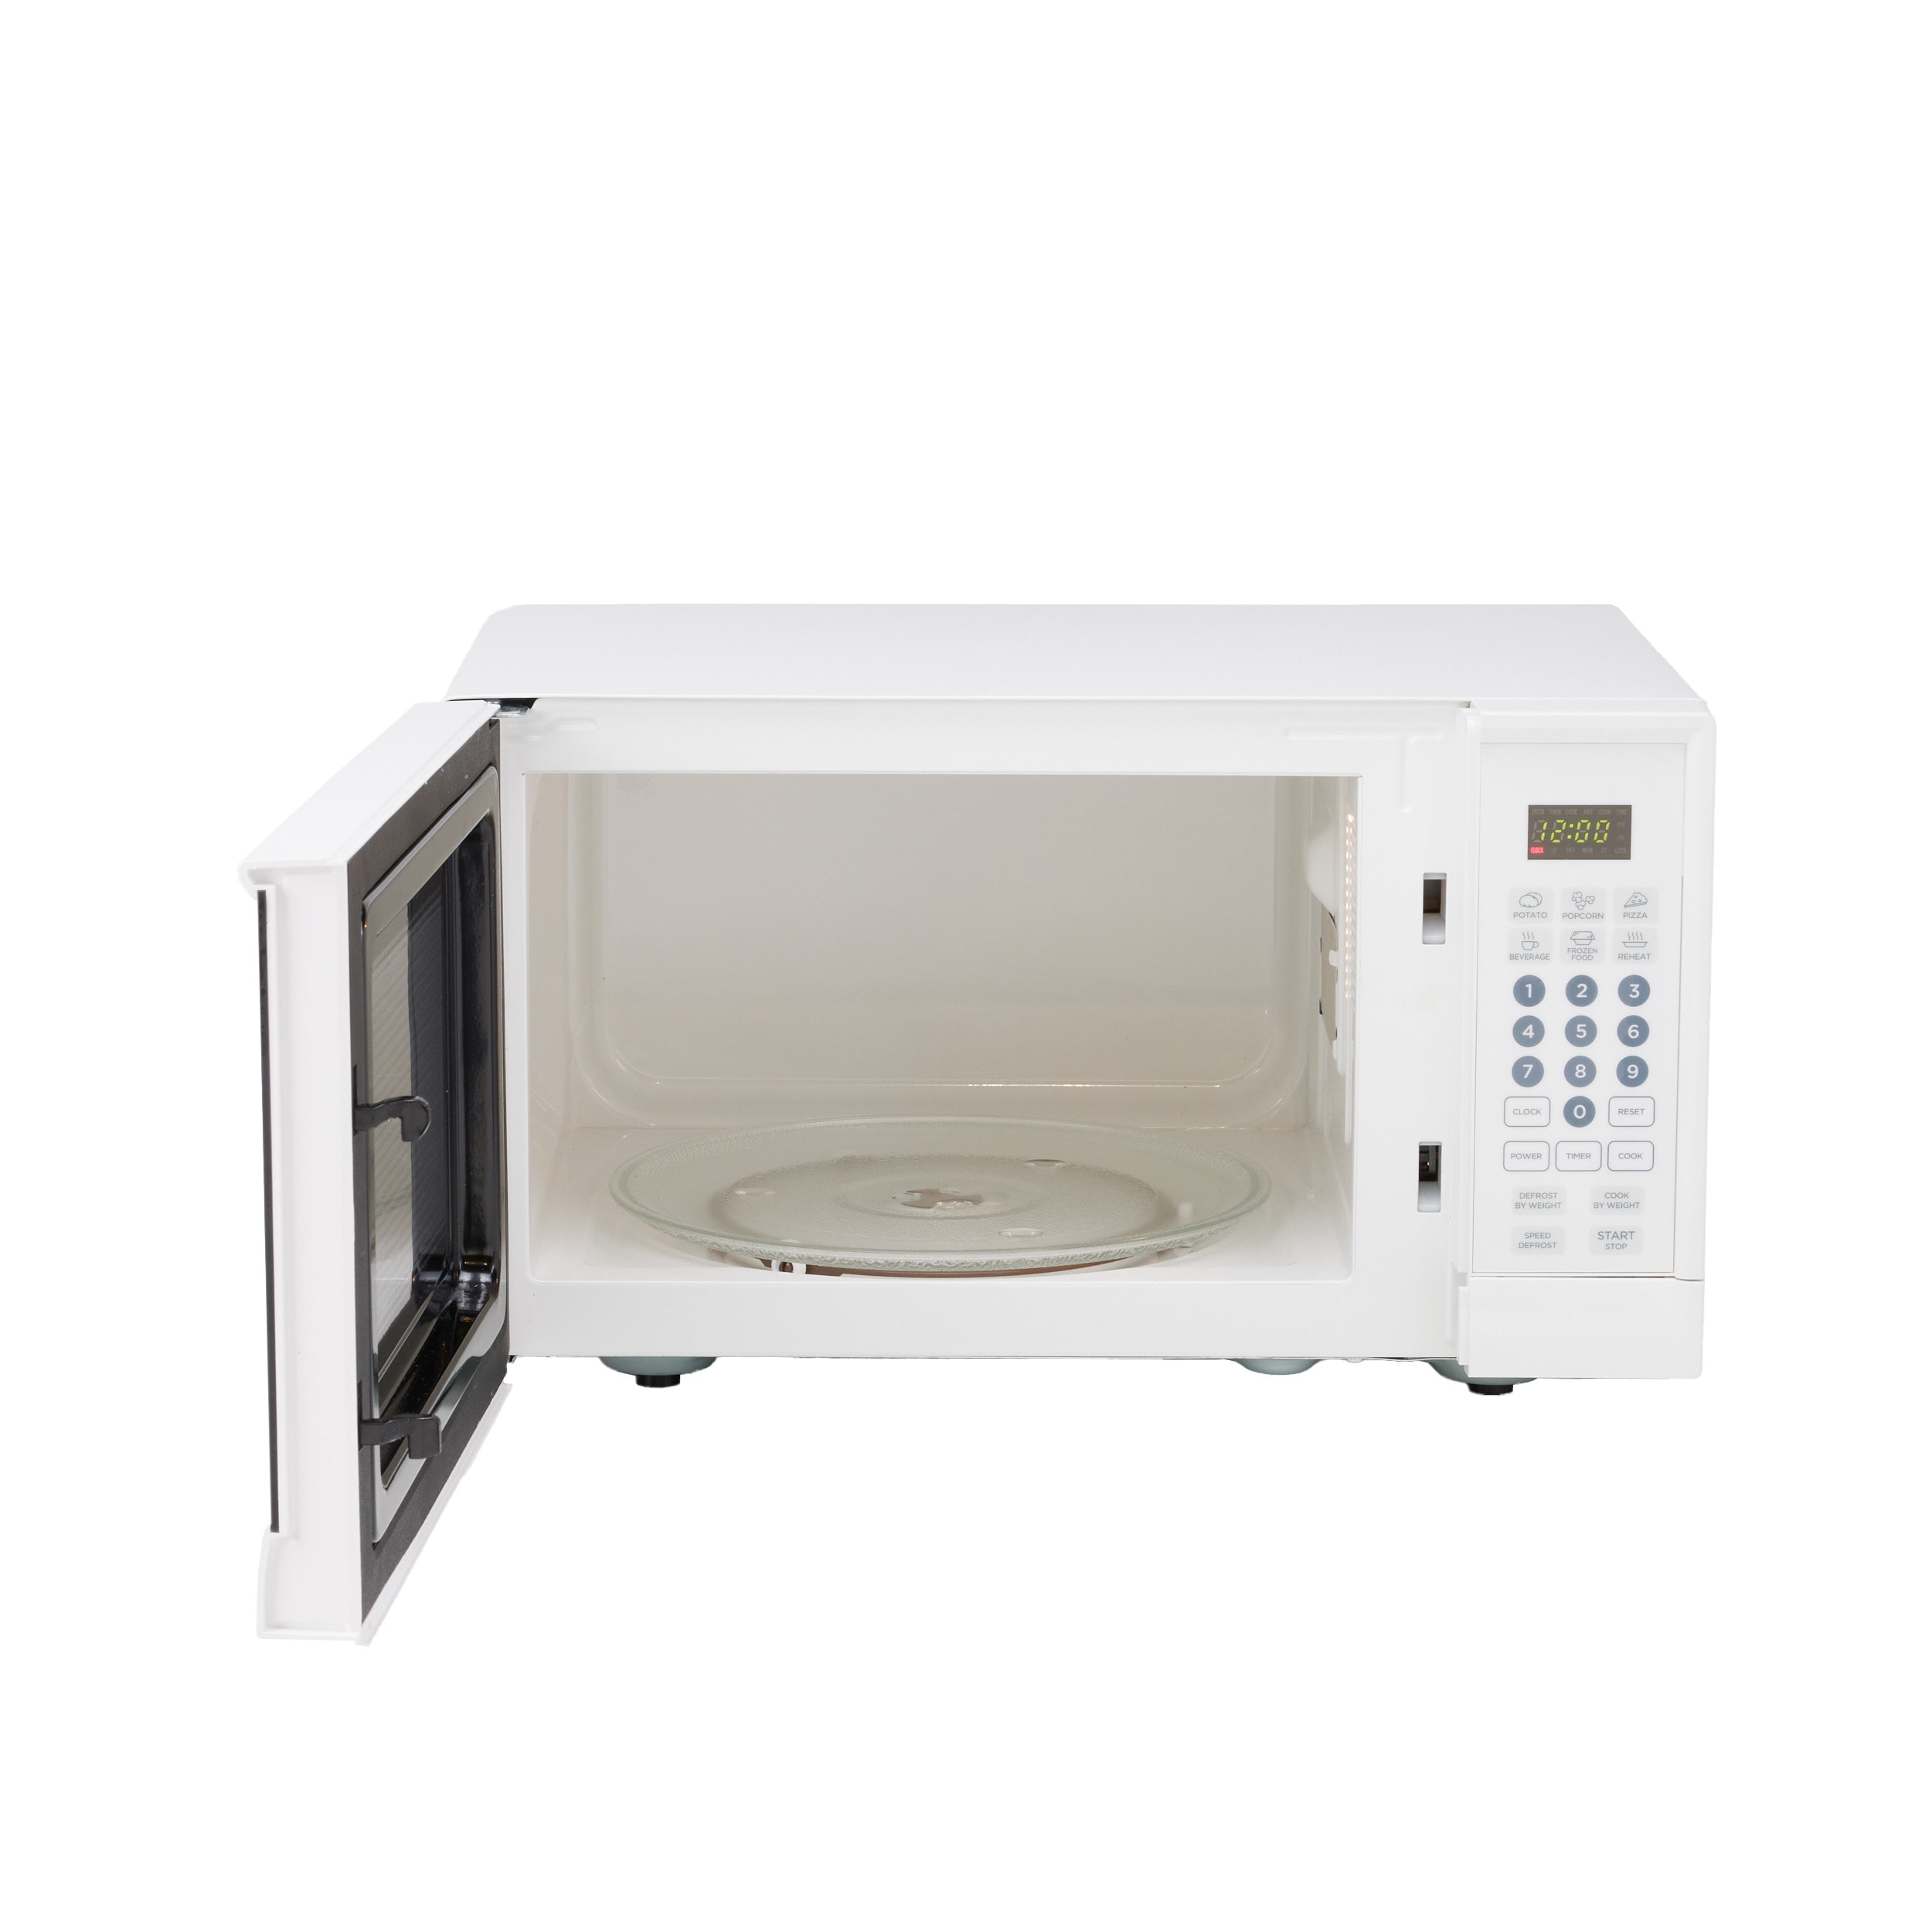 Westinghouse Stainless Steel Countertop Microwave Oven 1.1 Cubic